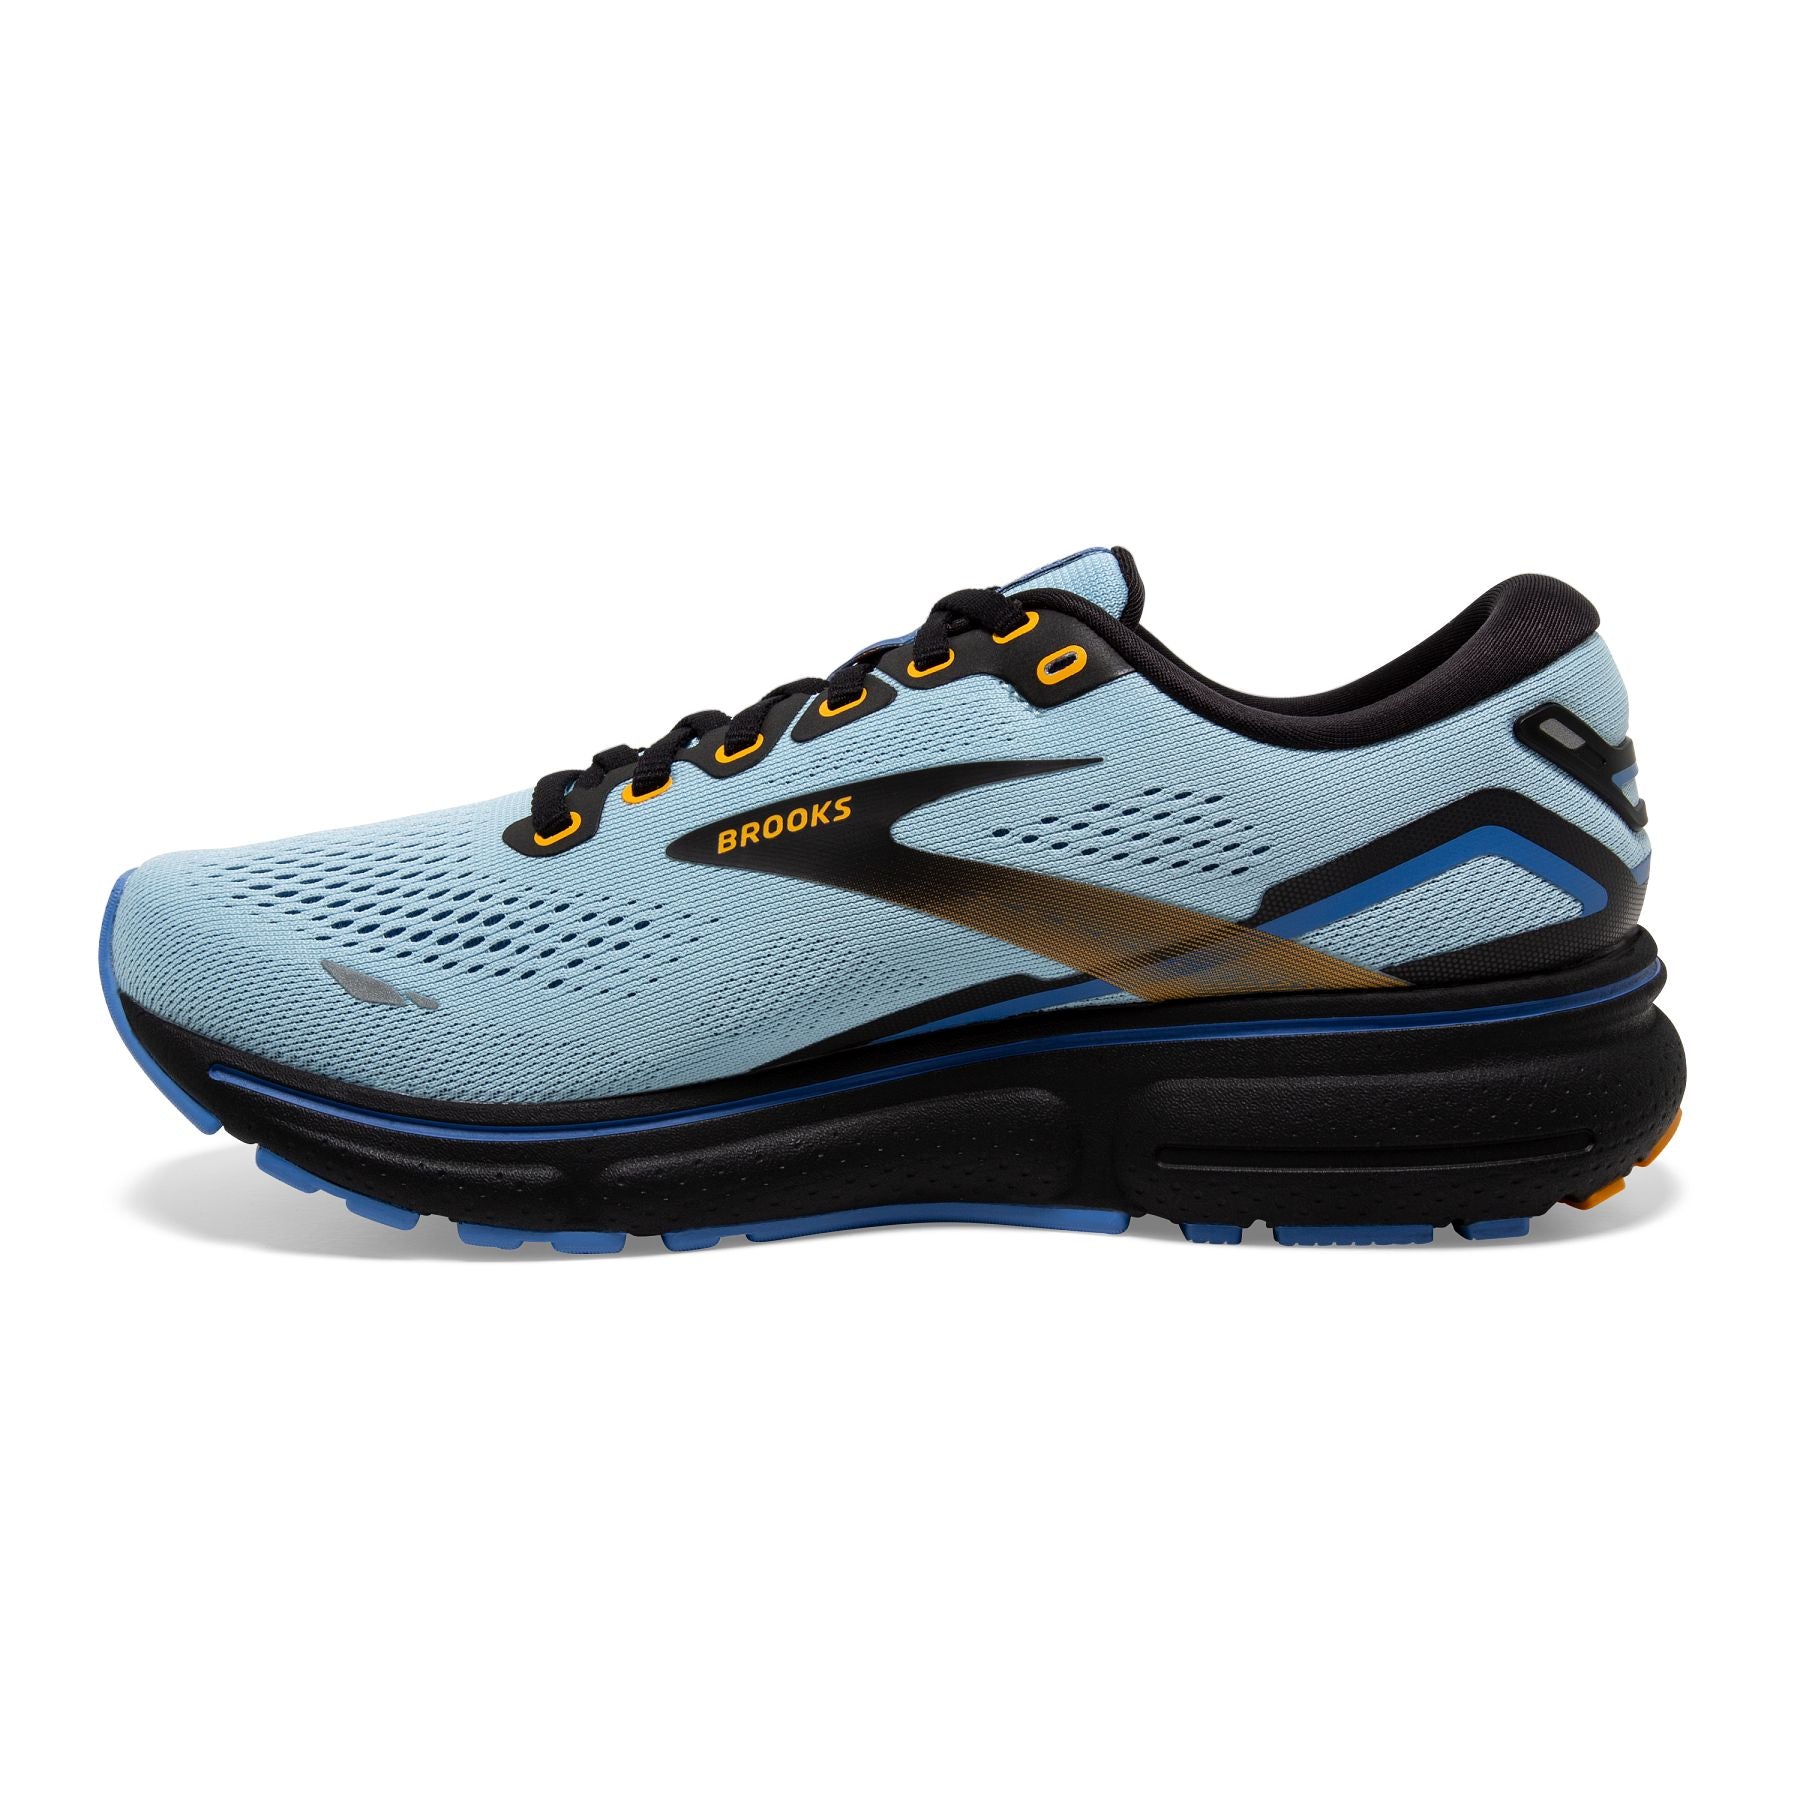 Medial view of the Women's Ghost 15 in Light Blue/Black/Yellow